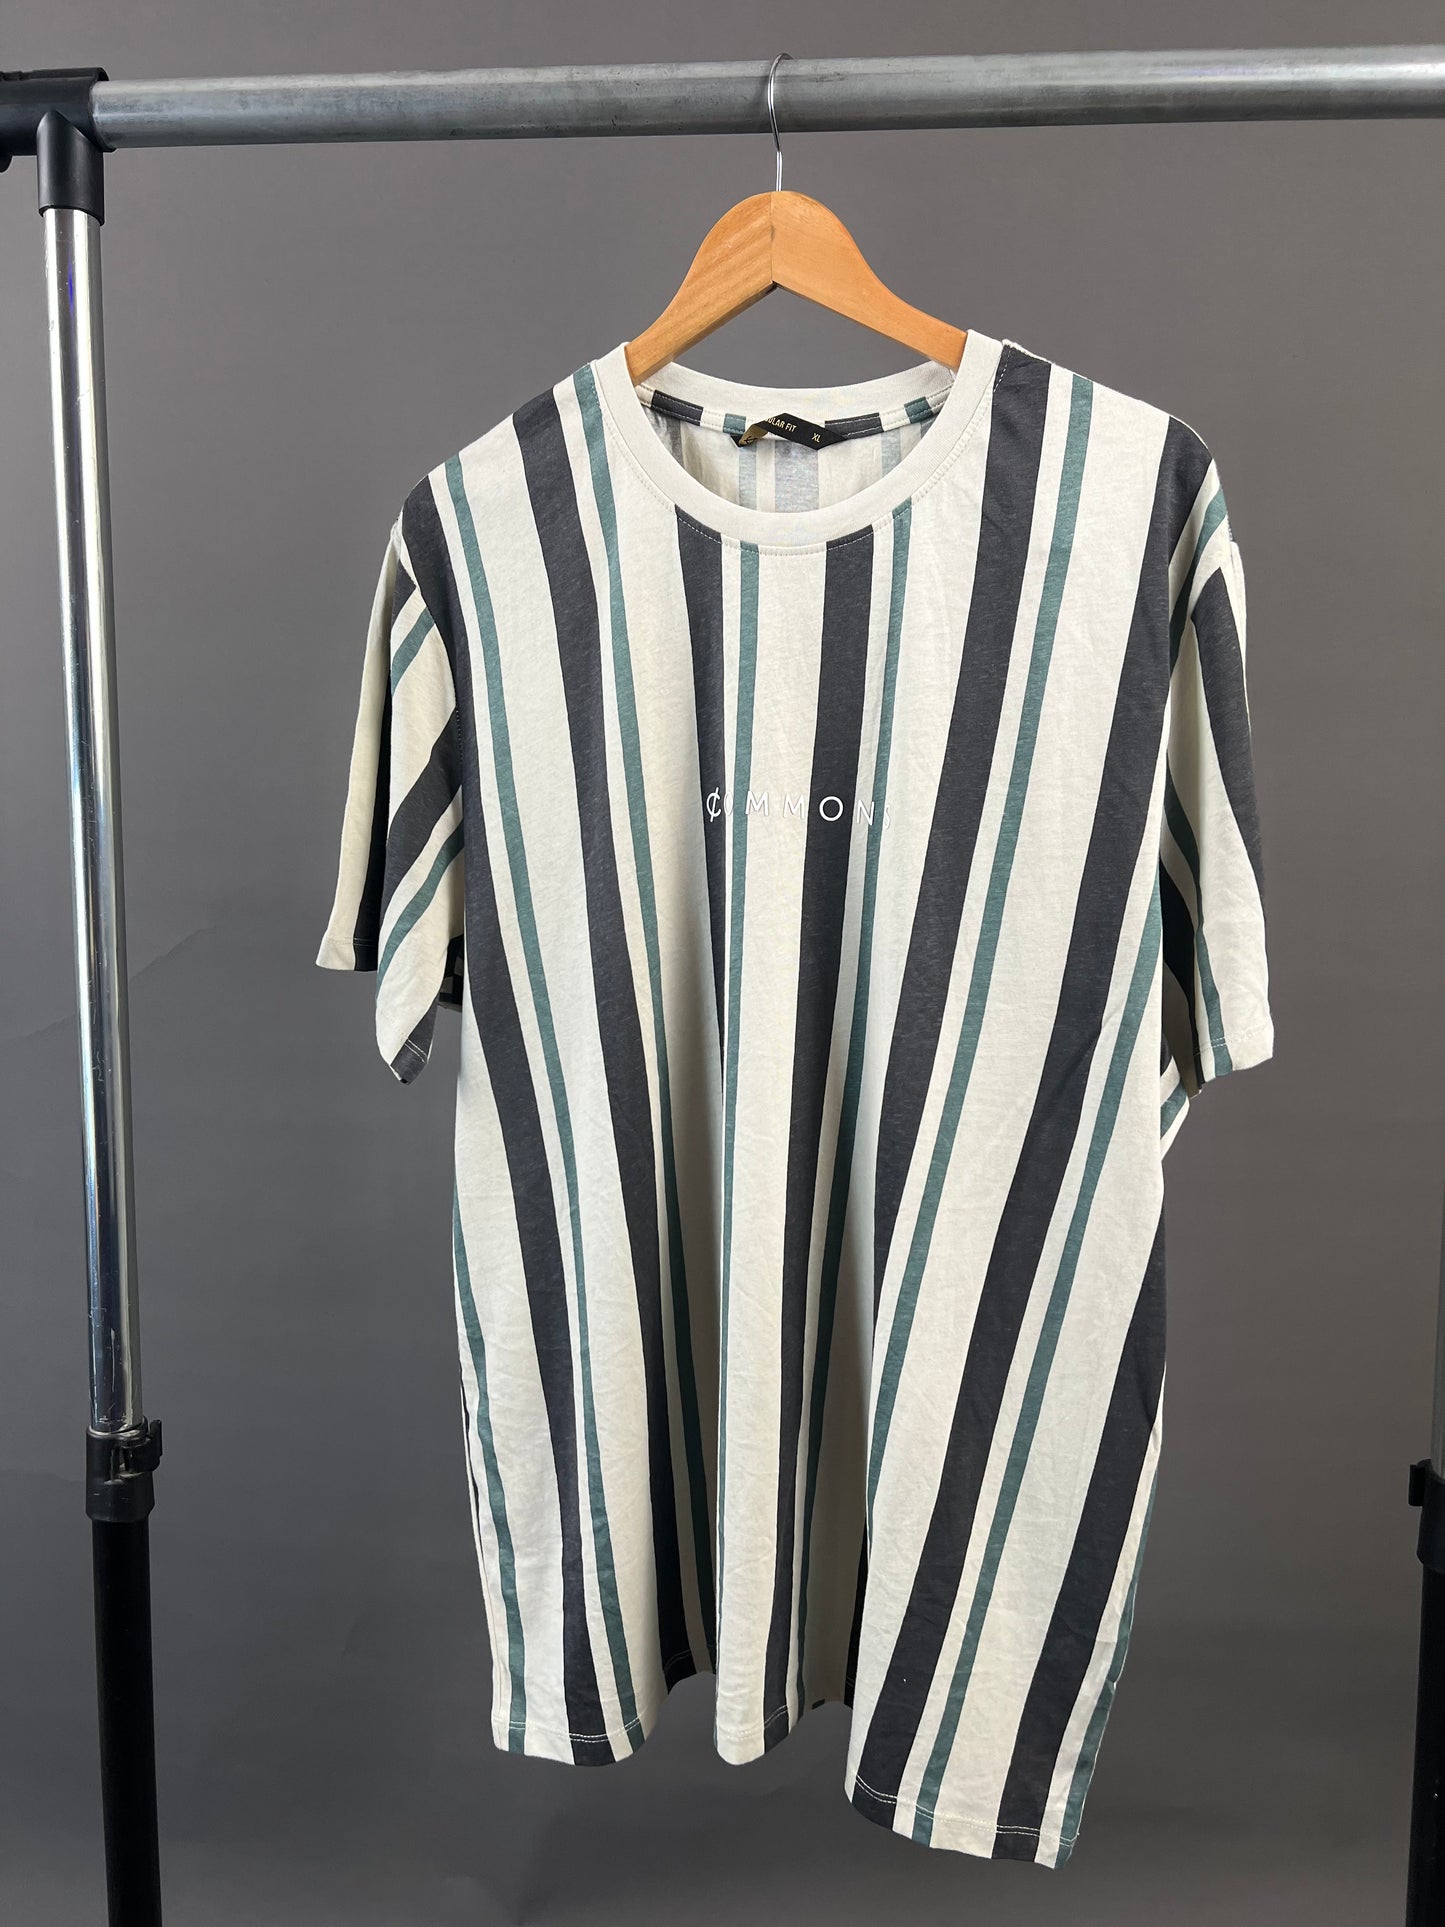 Commons pinstripe T-shirt in off-white